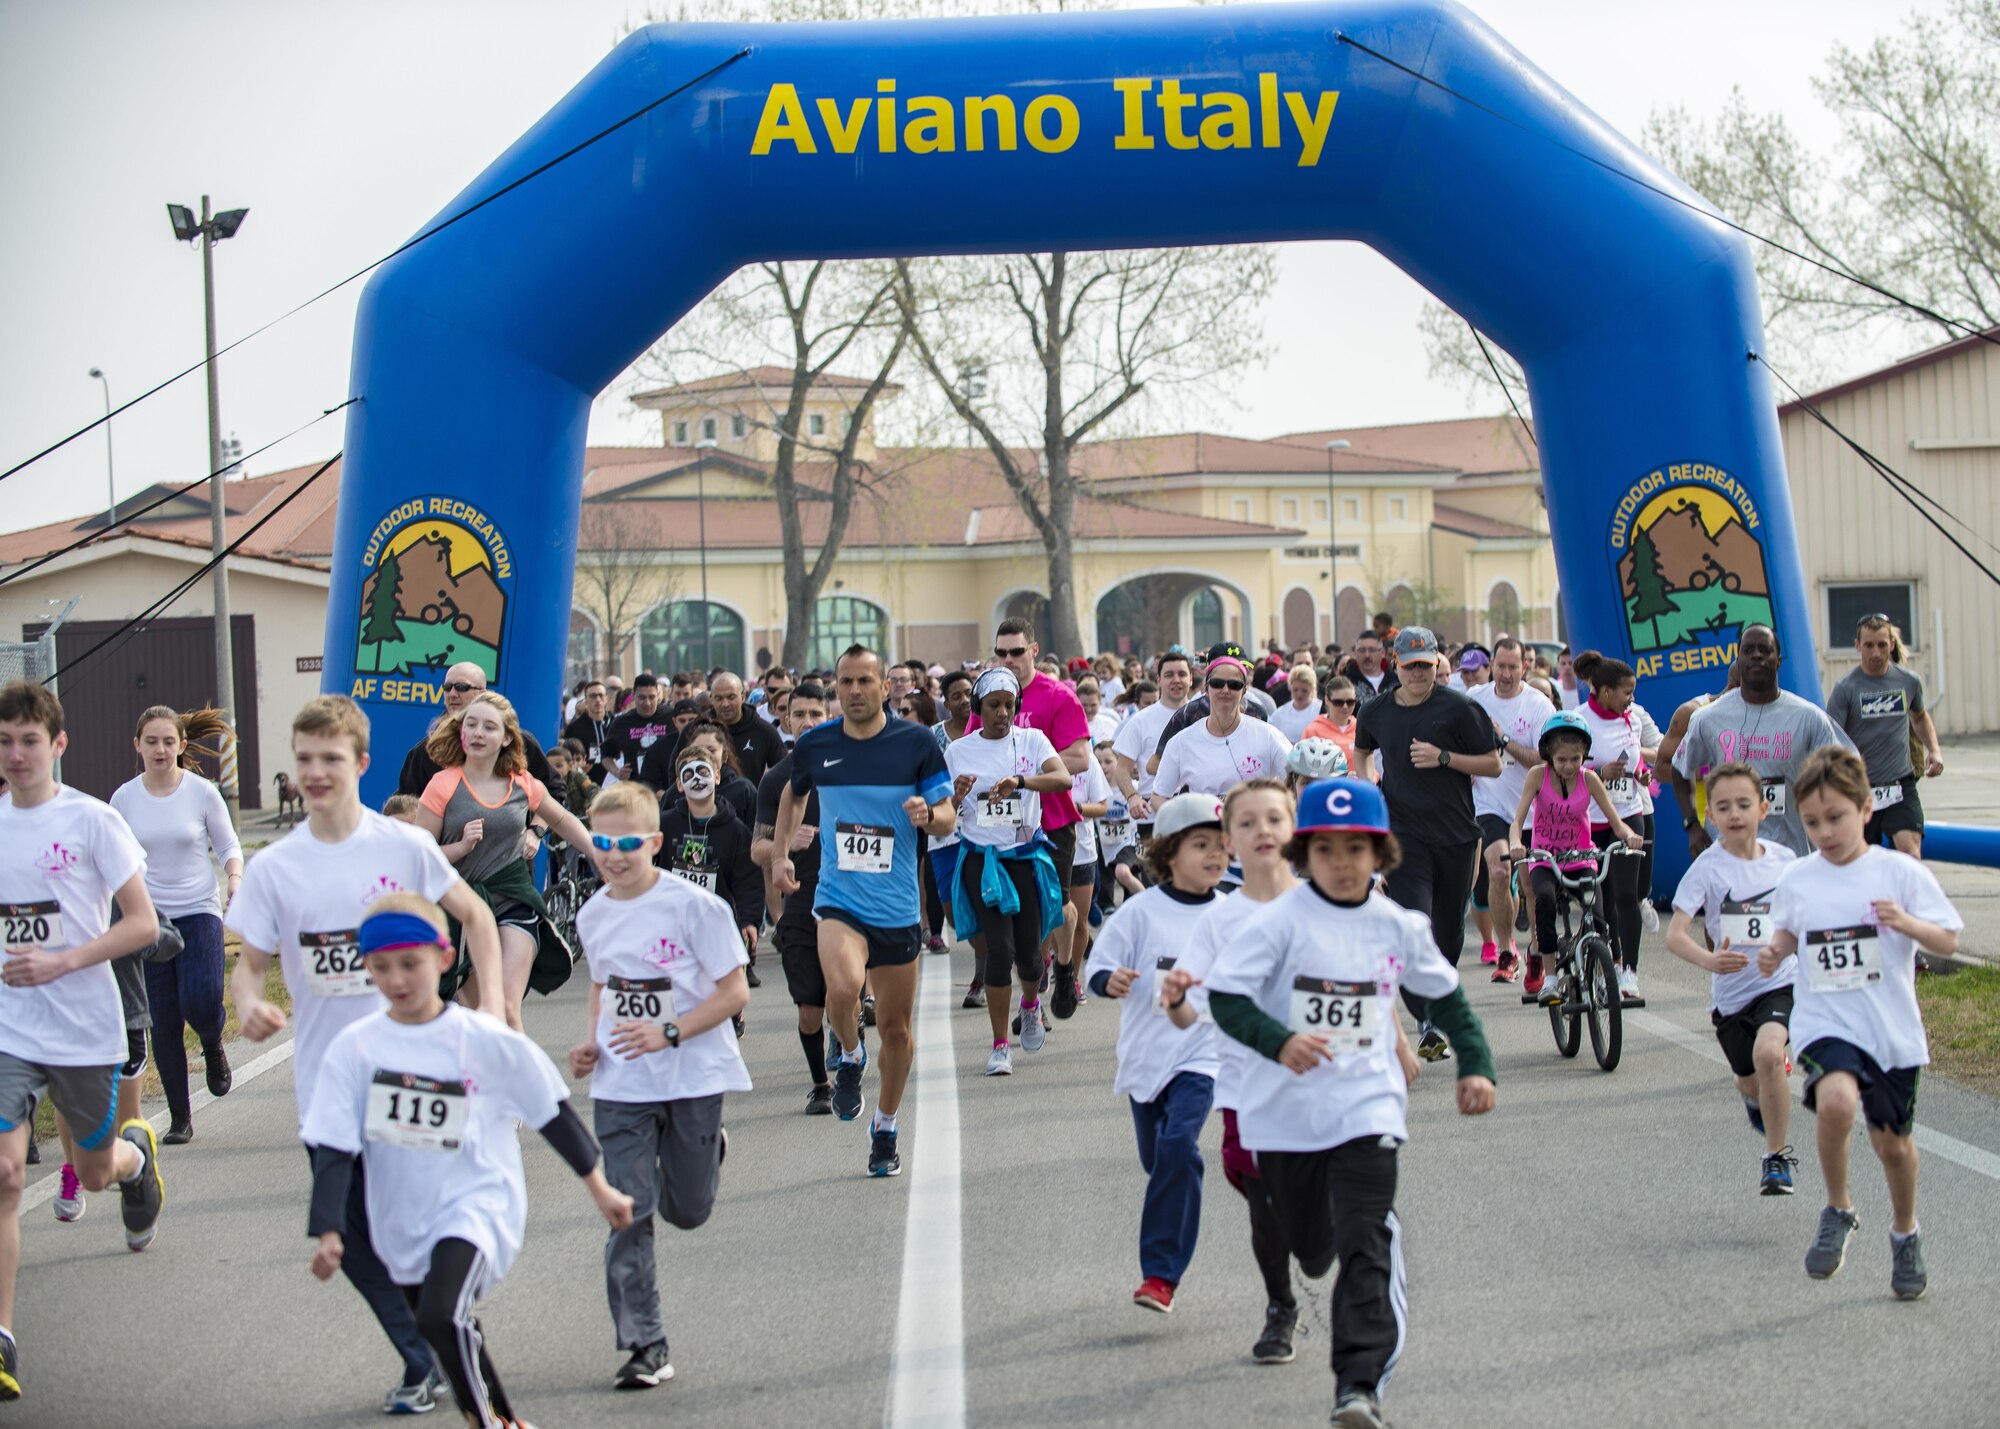 Team Aviano members and local Italians gathered for the 11th Annual Breast Cancer Awareness Walk at Aviano Air Base, Italy, March 18, 2017. More than 500 participants helped raise over $12,000 for the Centro di Riferimento Oncologico, a local oncology referral center, and The Rose, a non-profit mobile mammography bus that offers exams and treatments to underprivileged women in the Houston area. (U.S. Air Force photo by Senior Airman Cory W. Bush)